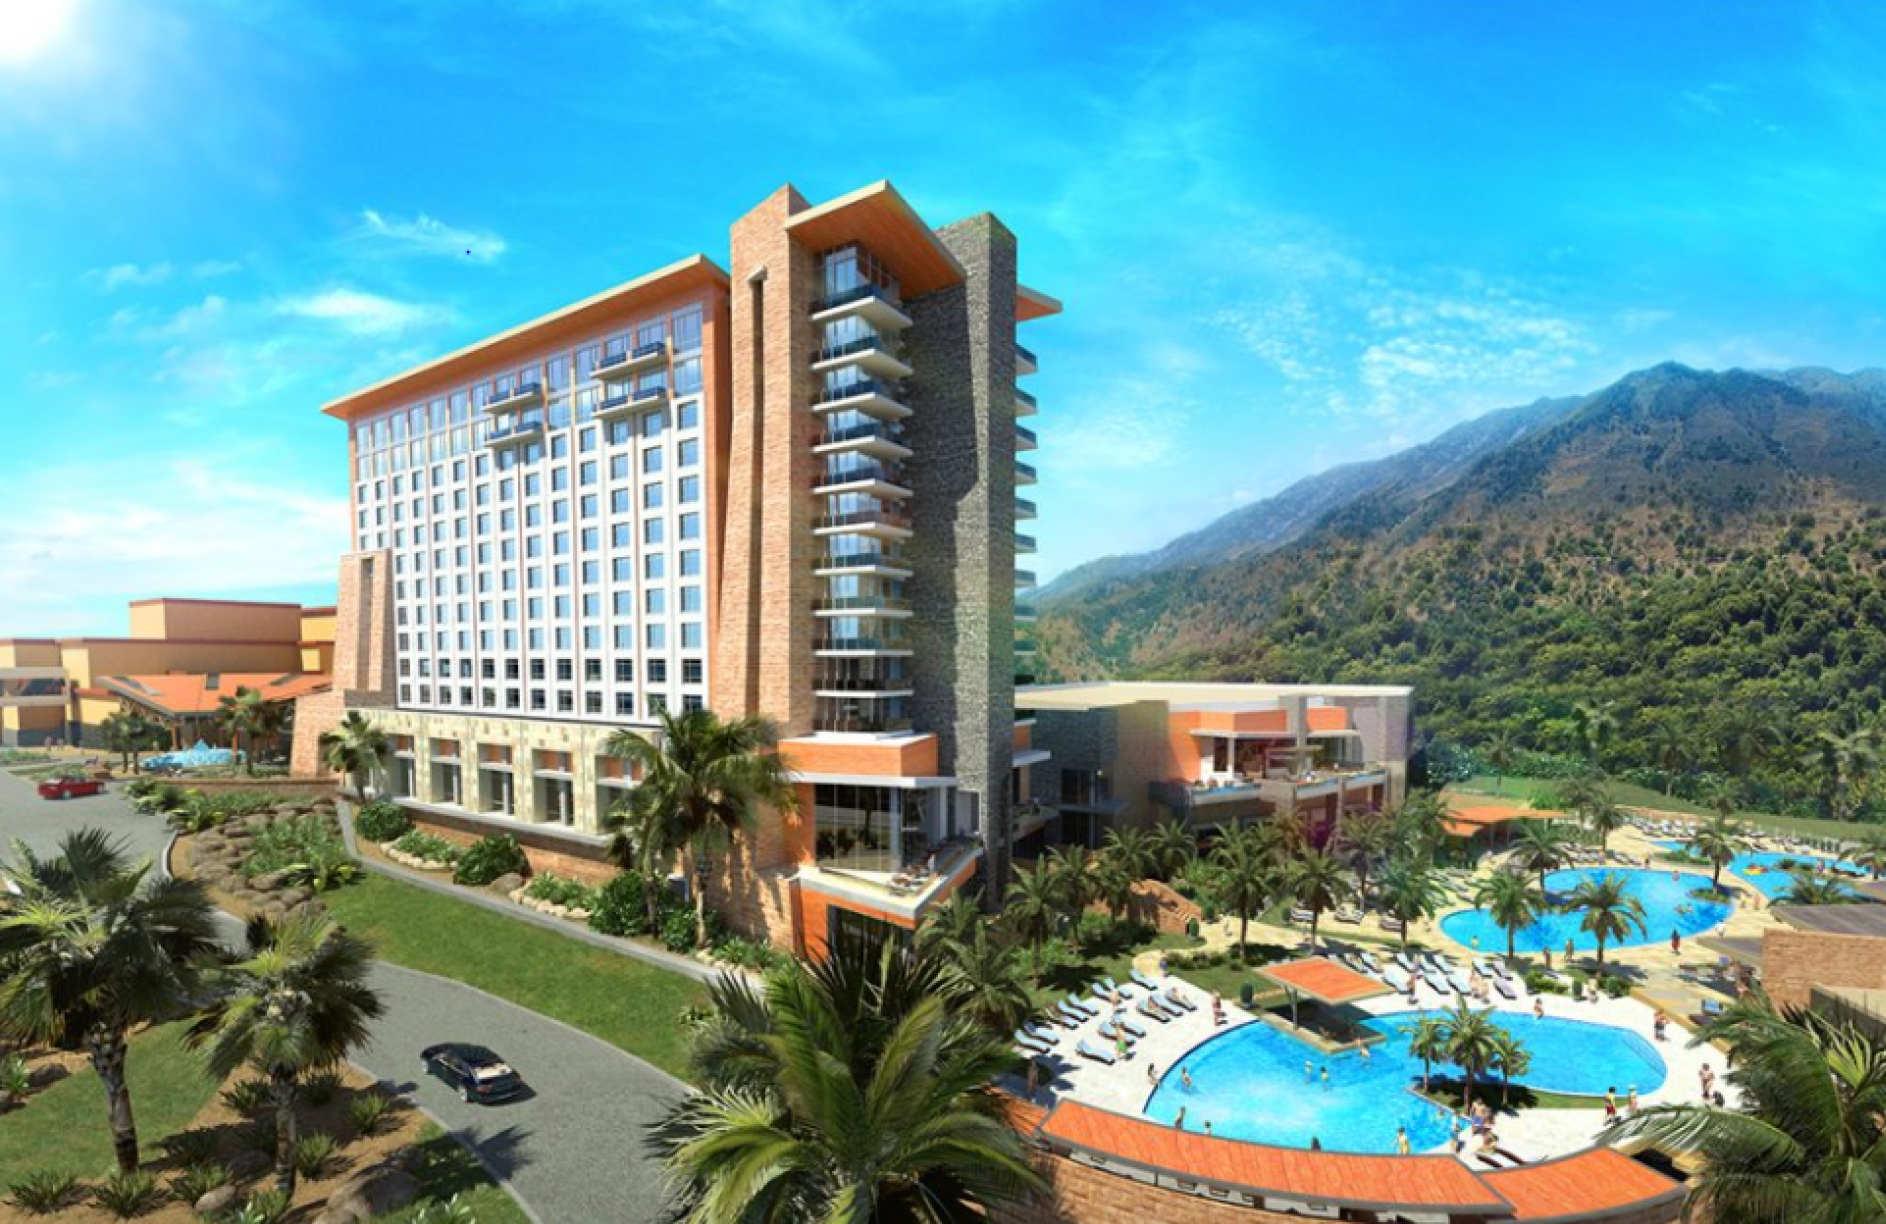 Sycuan Casino Hotel & Resort and Casino Expansion project